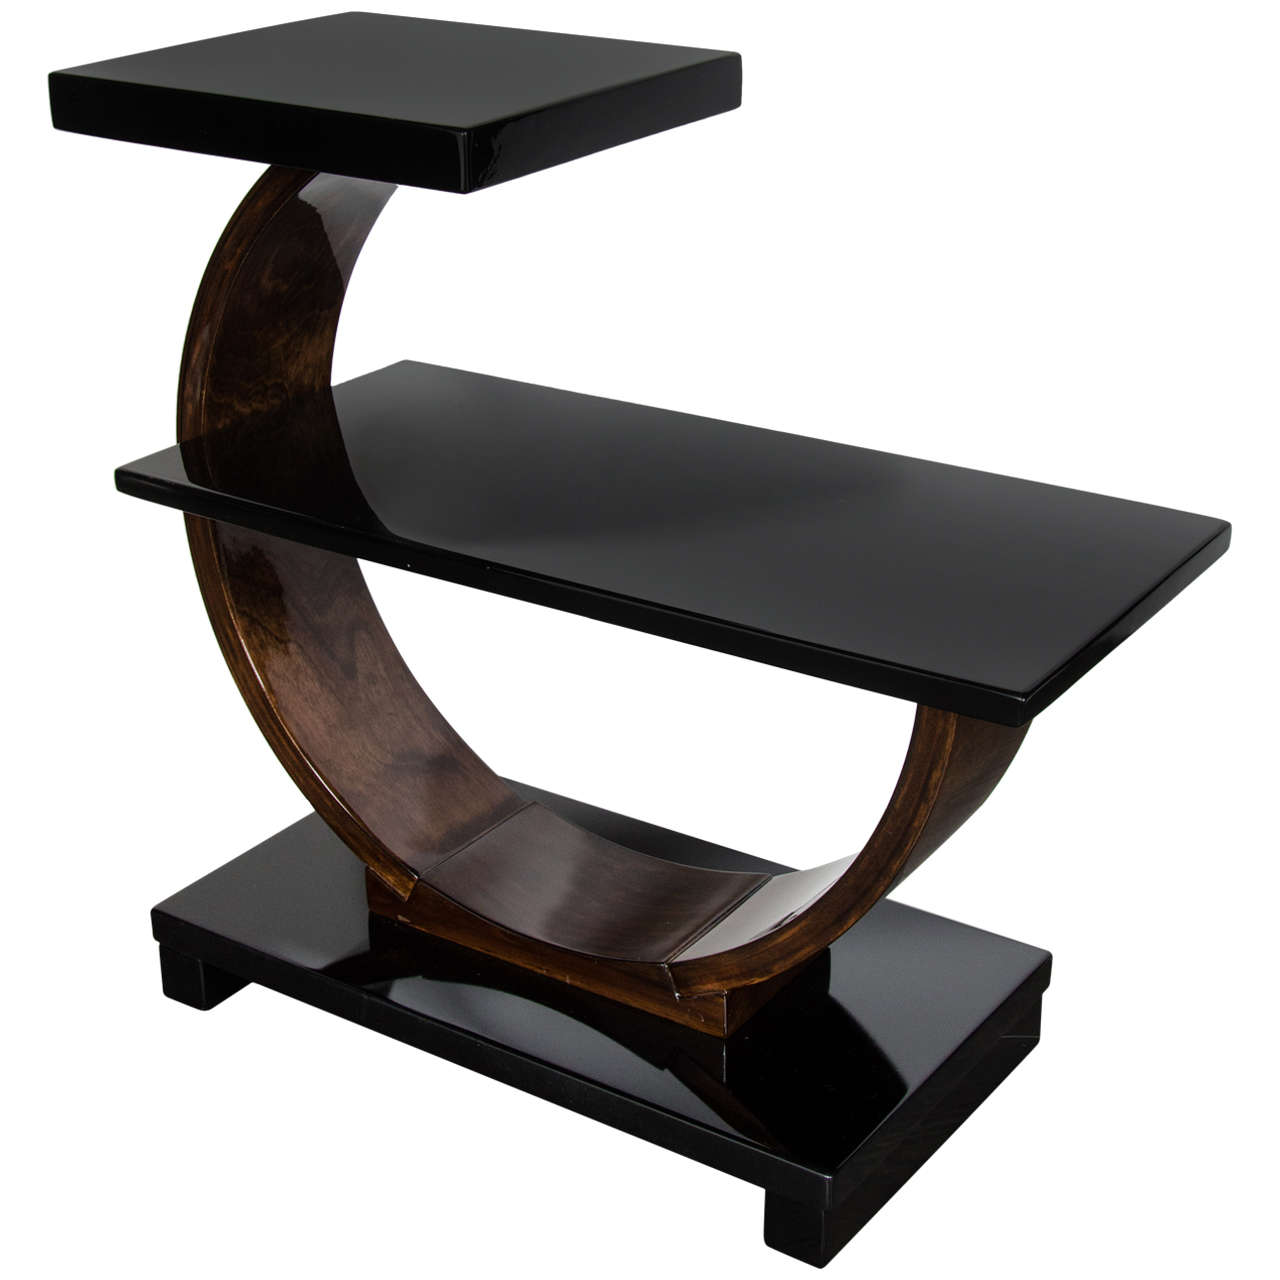 Sculptural Art Deco Side Table by Modernage in Black Lacquer & Walnut